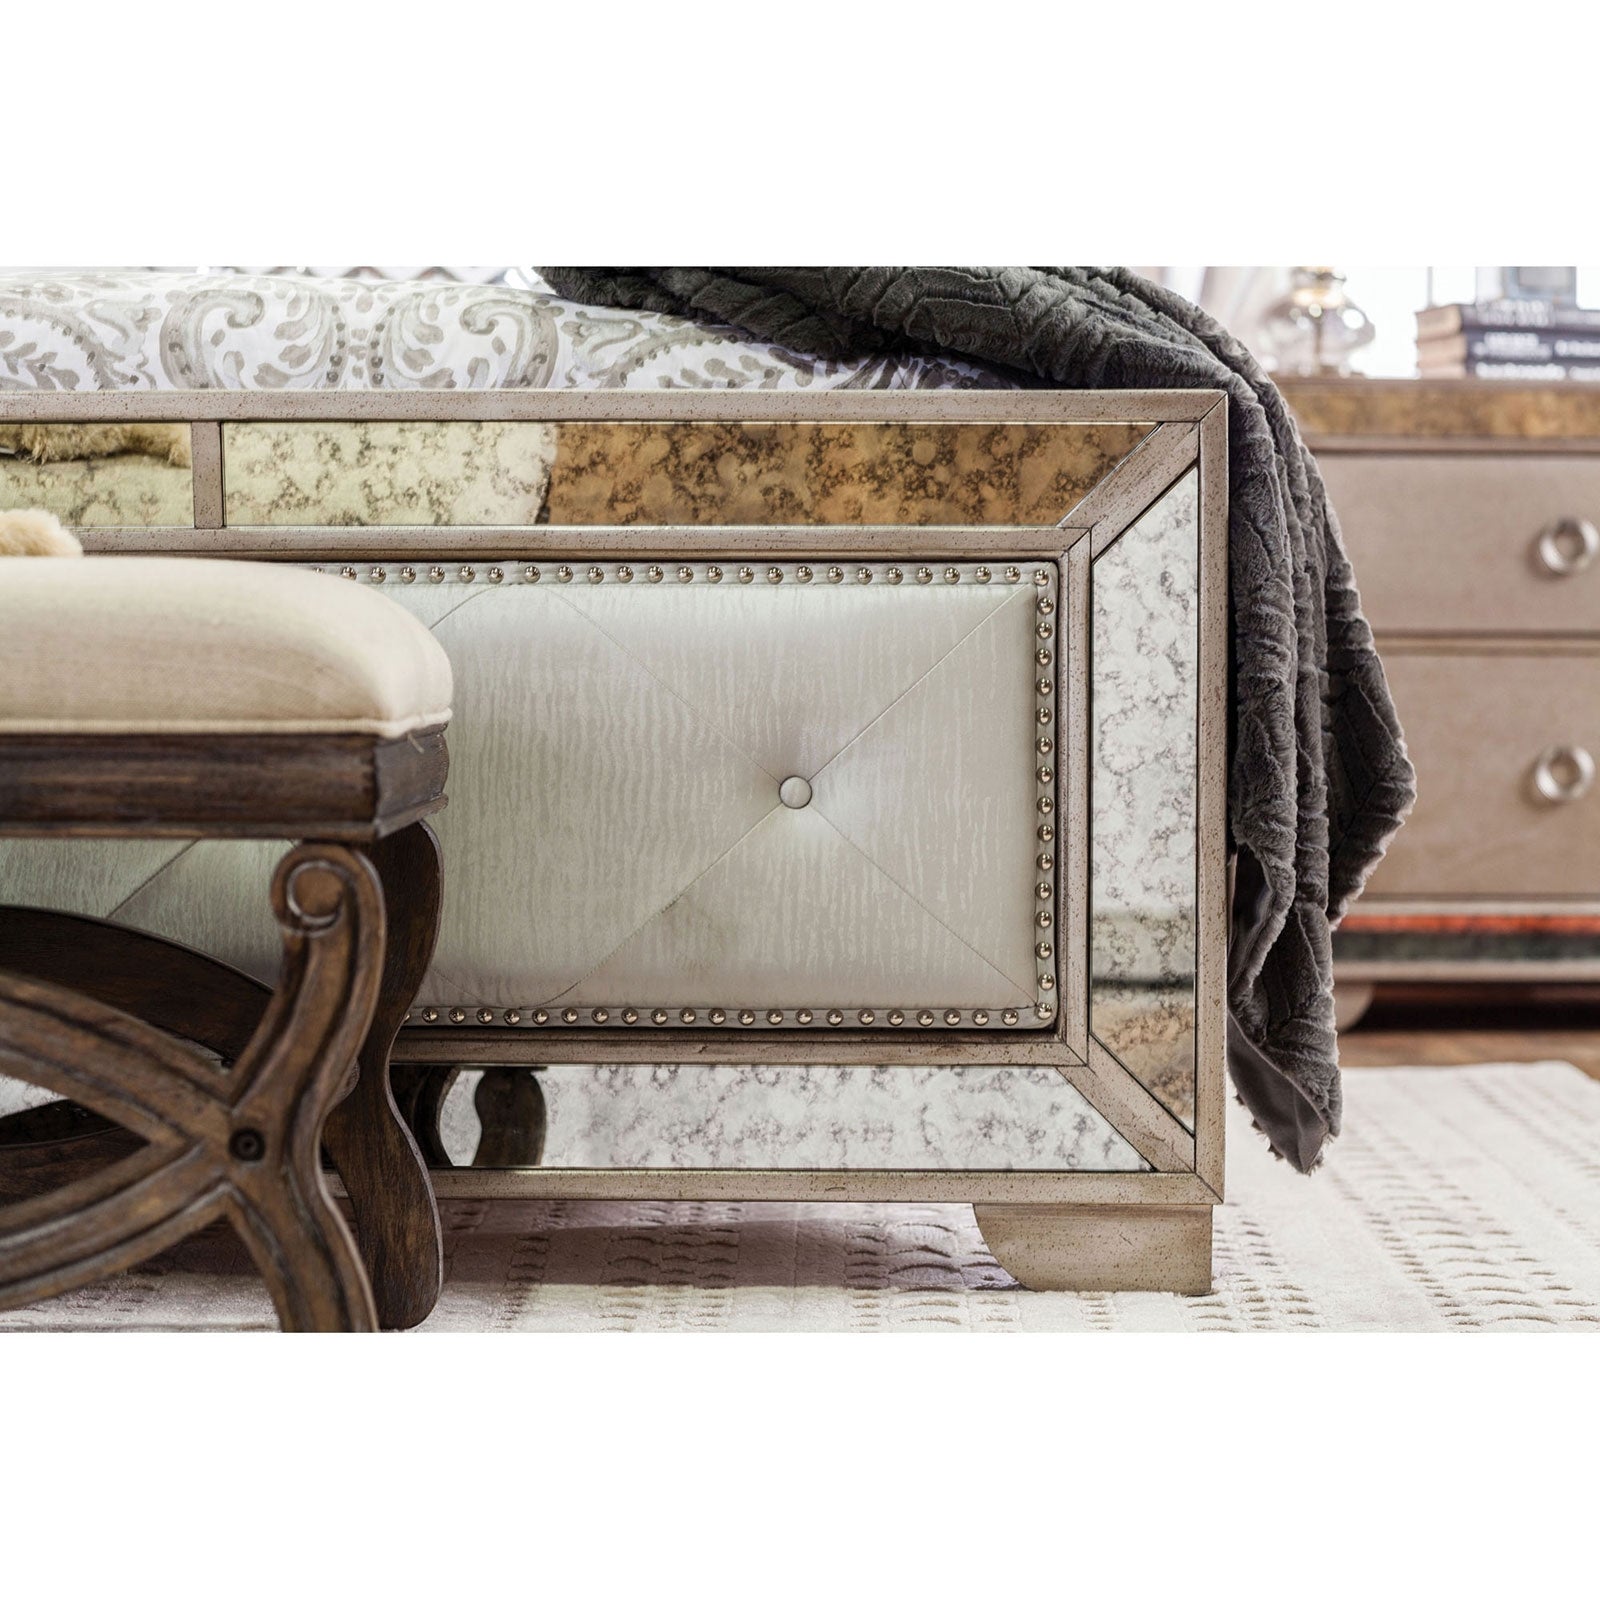 Loraine Glam Style Queen Bed with Antique Mirror Accents - Furniture of America 7195